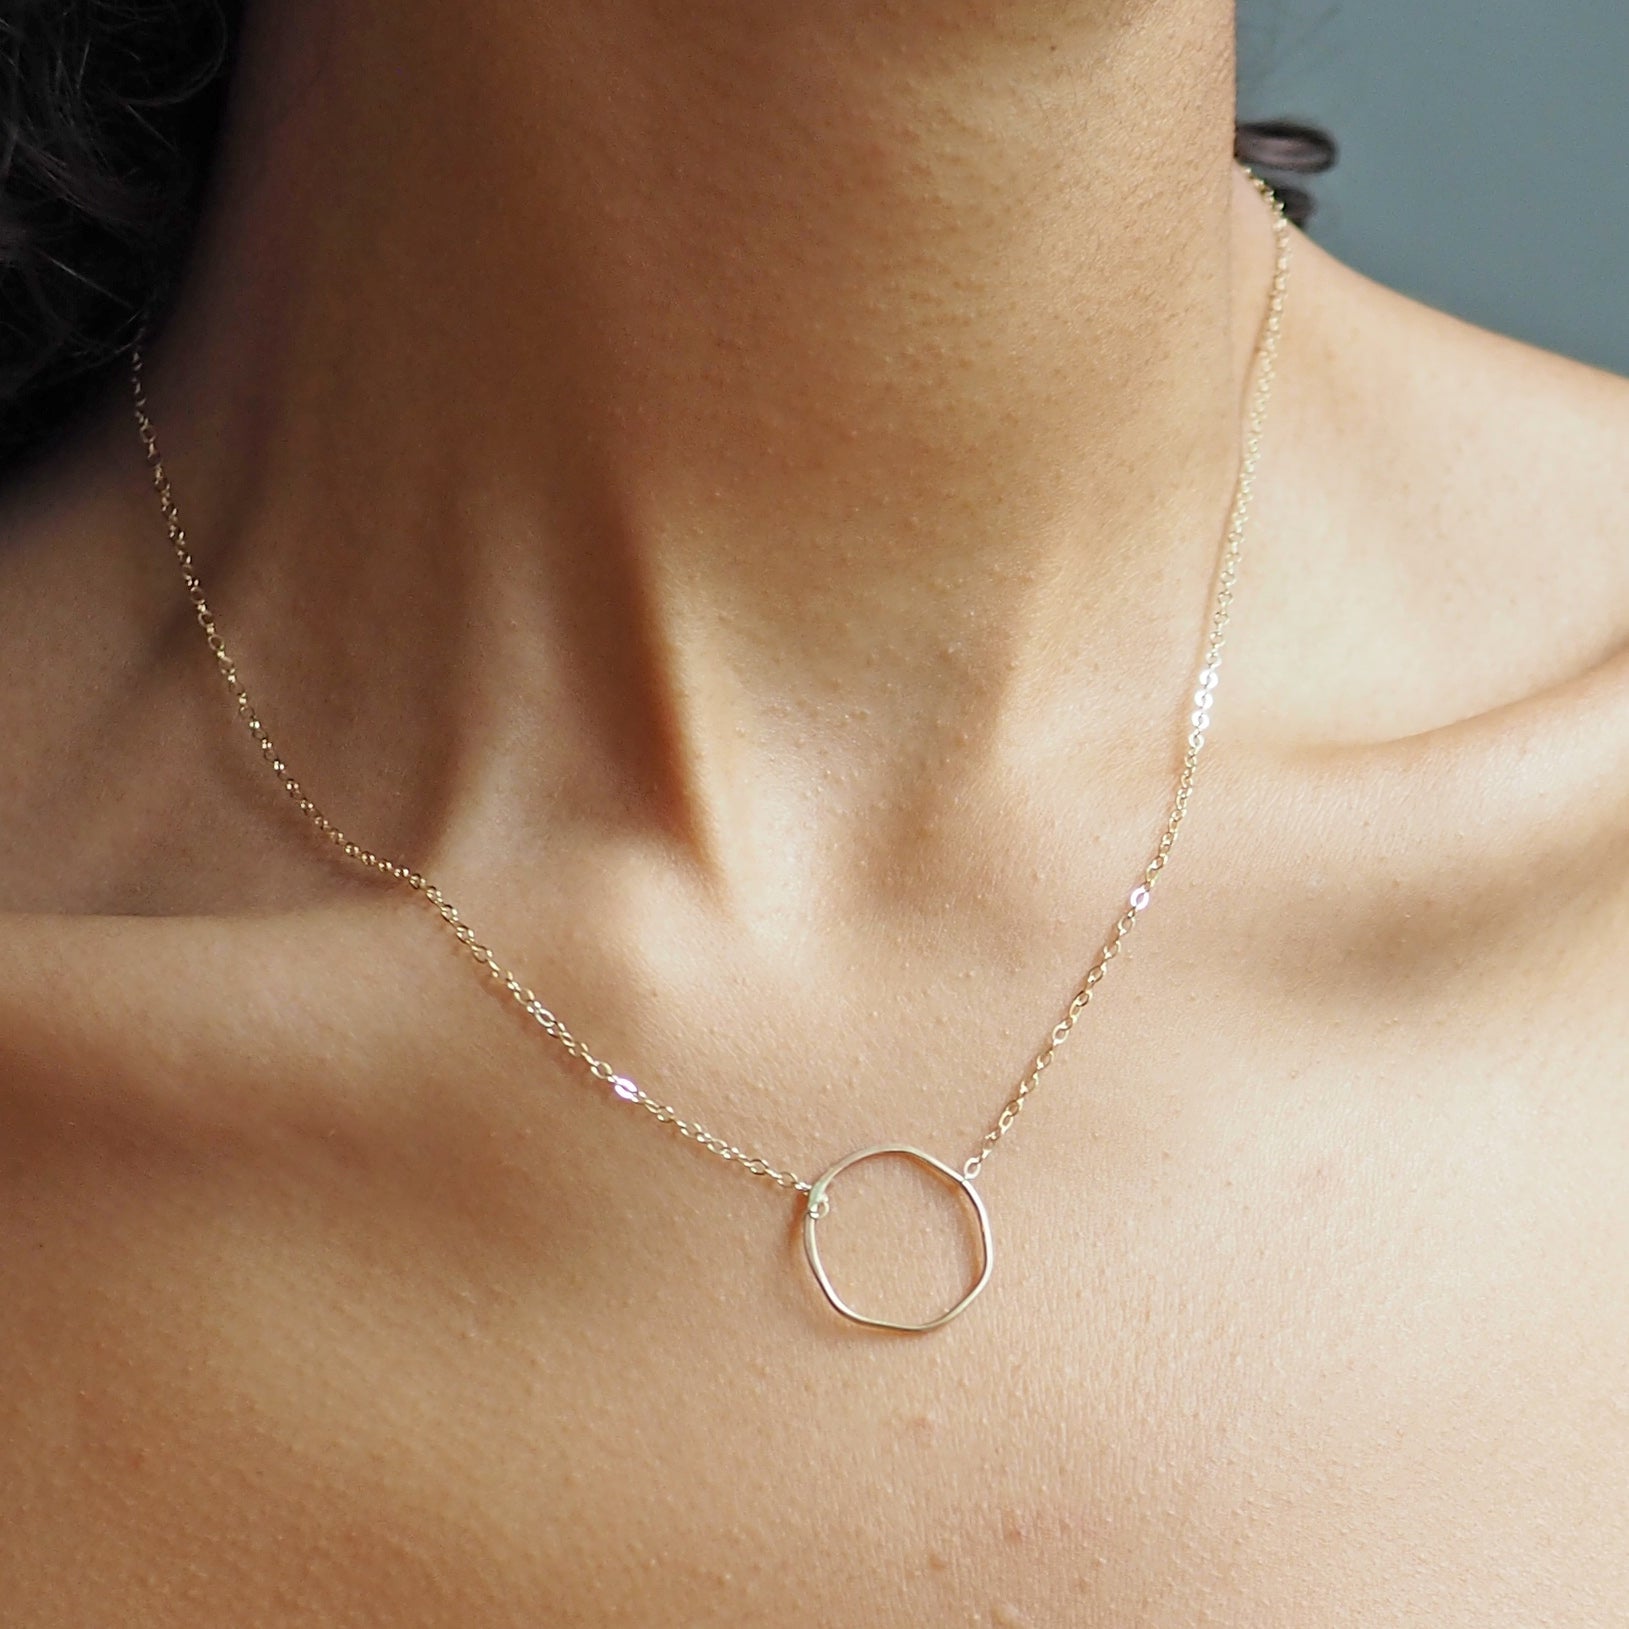 Imperfect Circle Necklace 14k Gold Fill